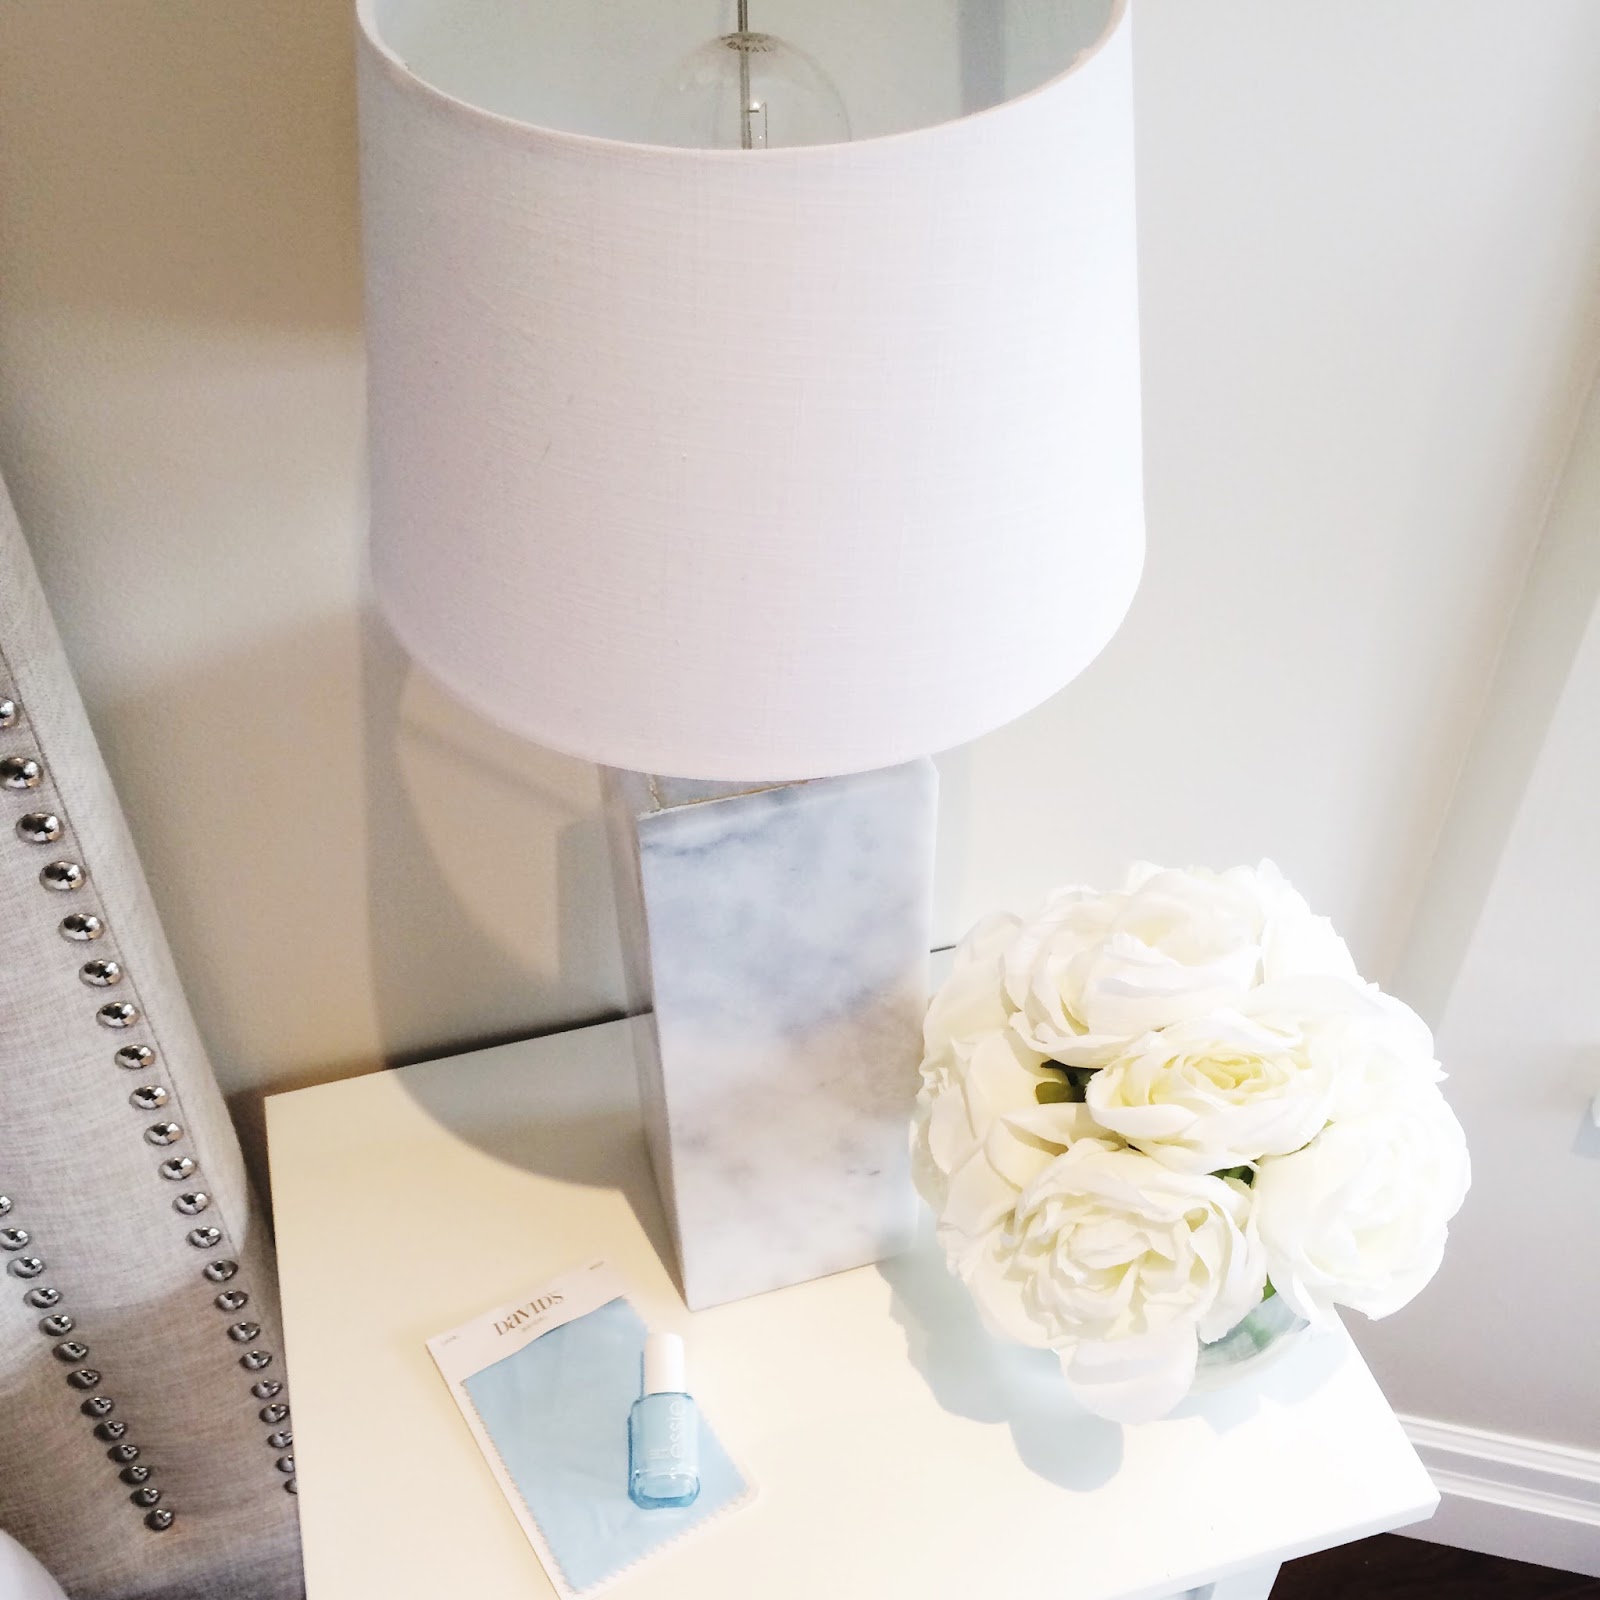 A white lamp on a table with flowers